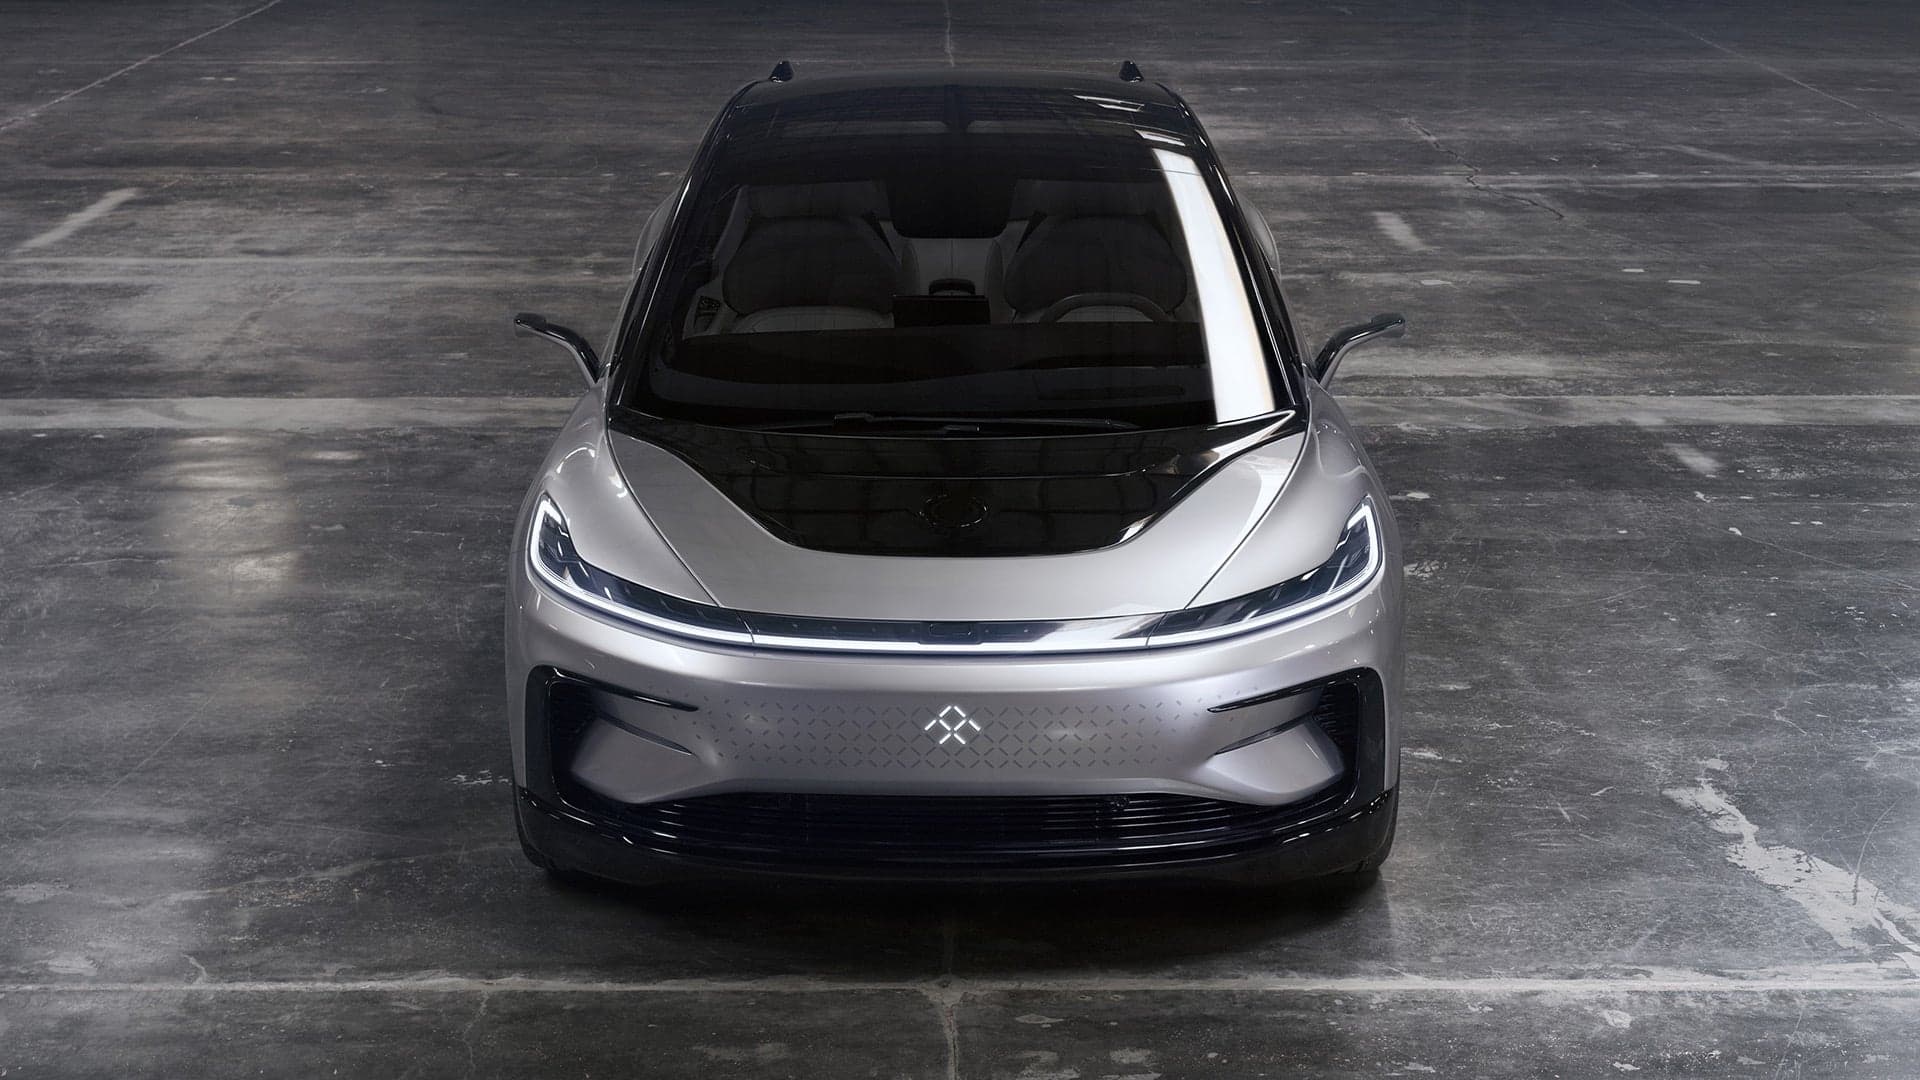 Faraday Future Holding Back on Large Production Numbers